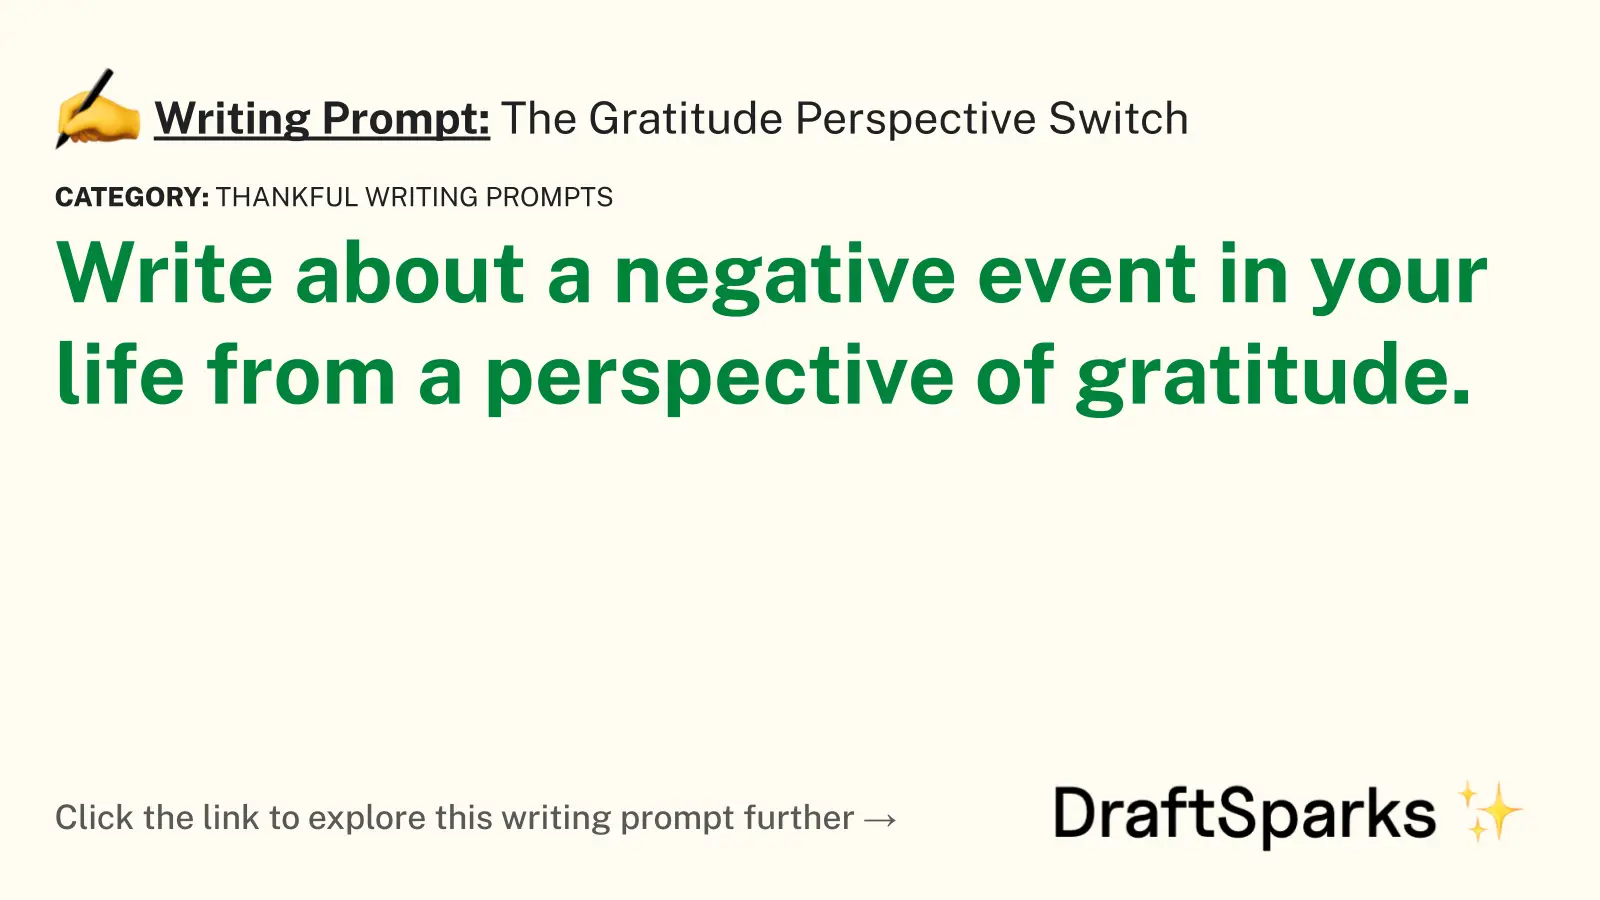 The Gratitude Perspective Switch